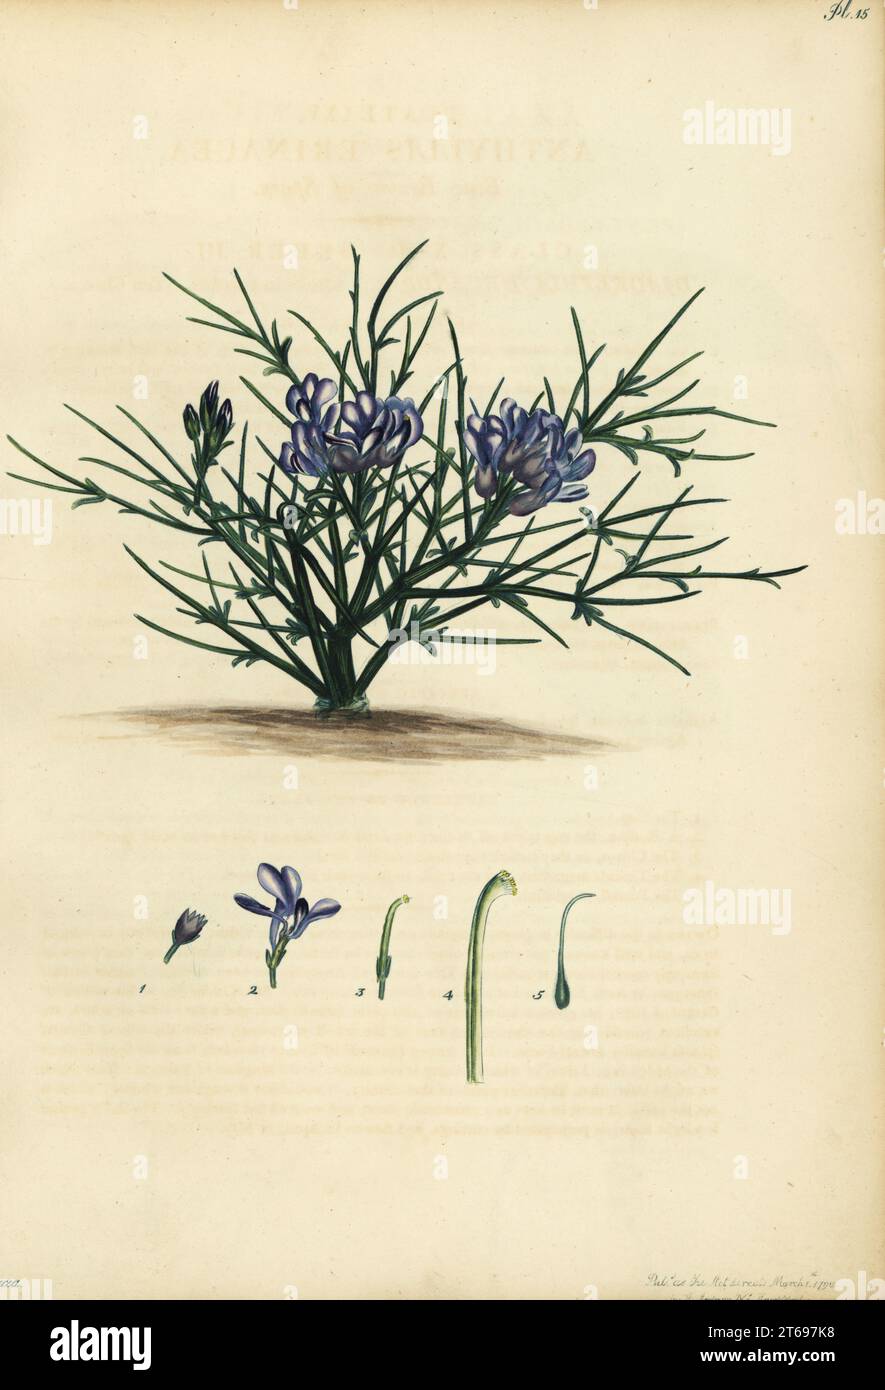 Erinacea erinacea. Blue broom of Spain, Anthyllis erinacea. Copperplate engraving drawn, engraved and hand-coloured by Henry Andrews from his Botanical Register, Volume 1, published in London, 1799. Stock Photo